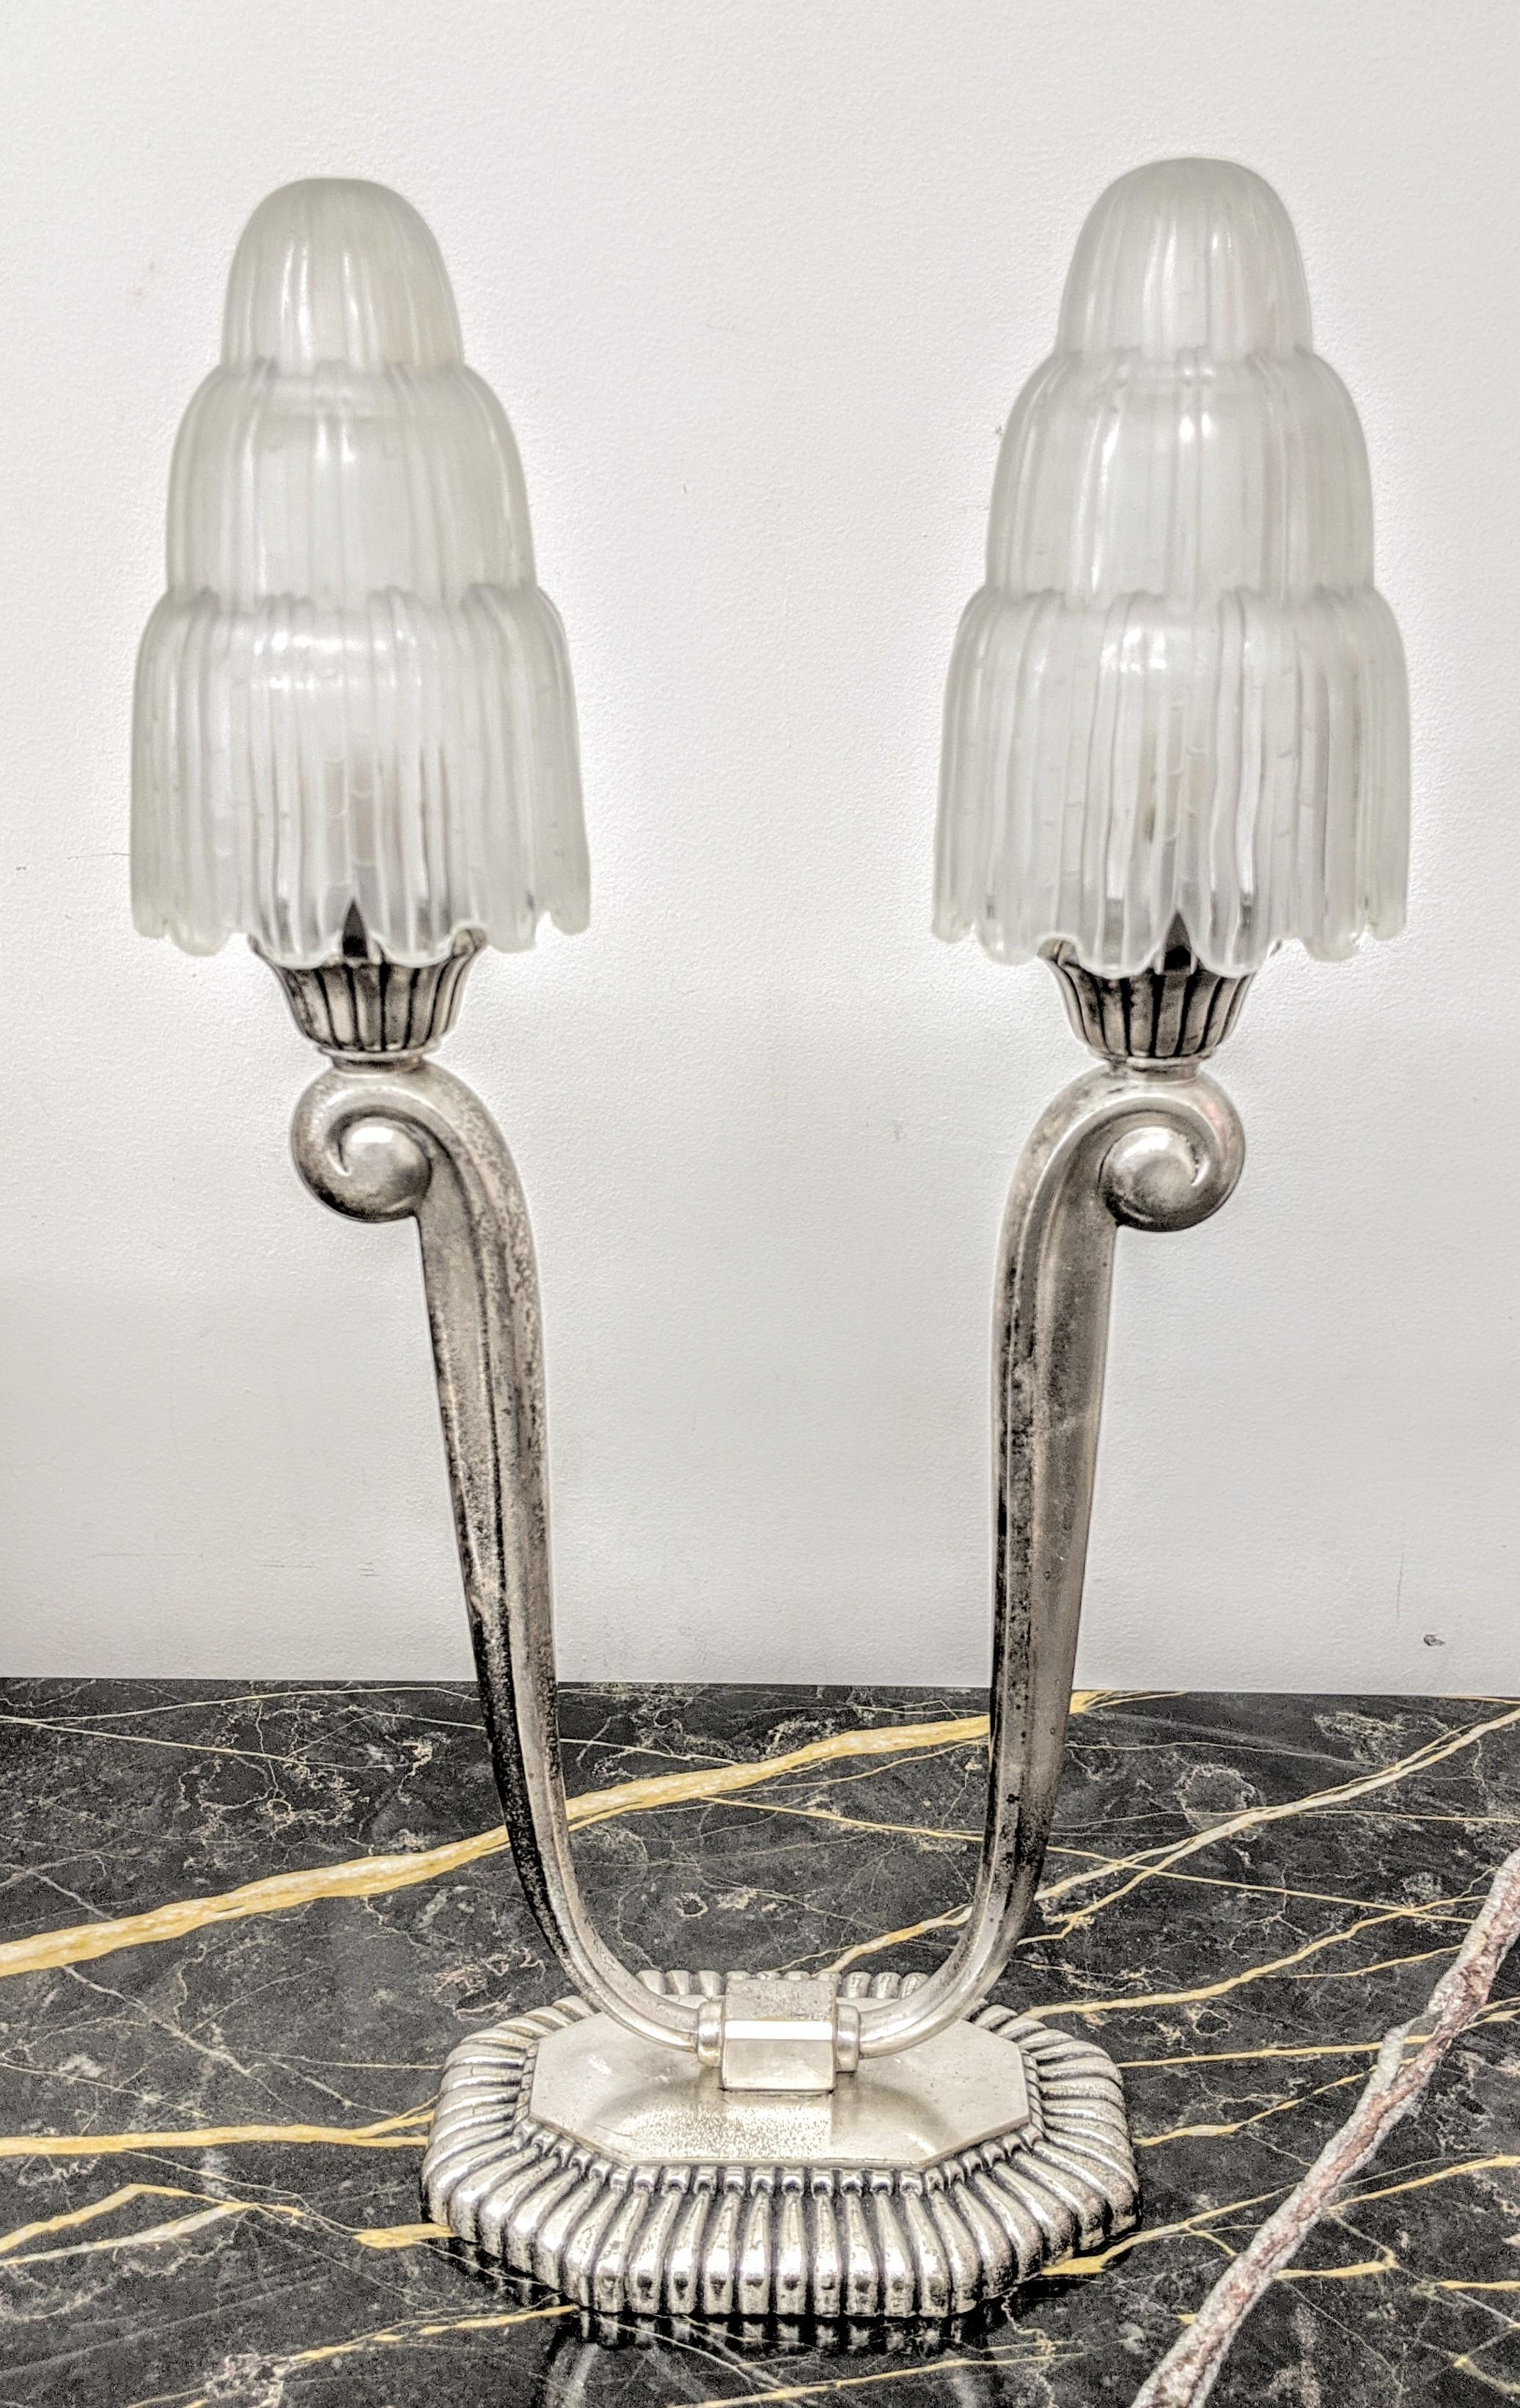 A stunning and extremely hard to come by pair of French Art Deco table lamps in great condition. A collaboration of the two highly acclaimed French Artists in the pinnacle of the Art Deco Era. The glass shades are known as the 